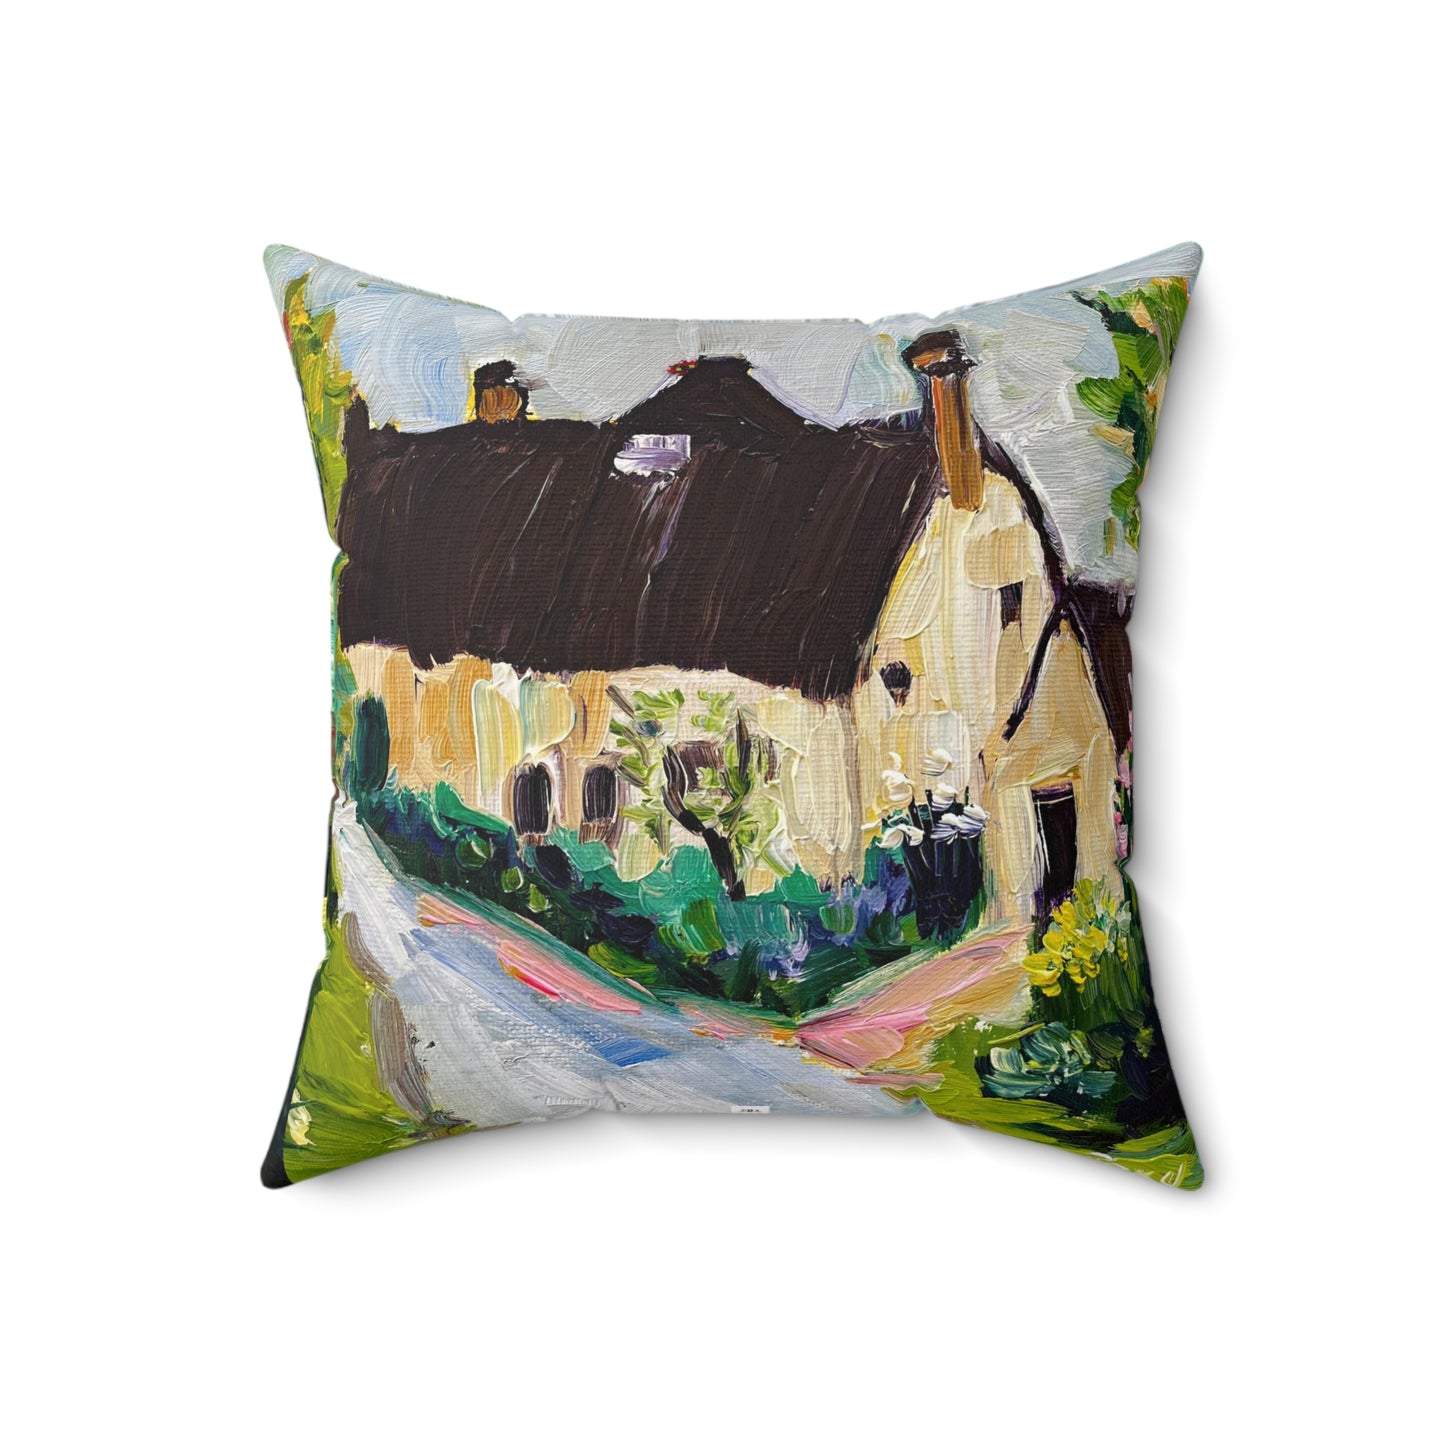 Charming Cotswolds Village Indoor Spun Polyester Square Pillow